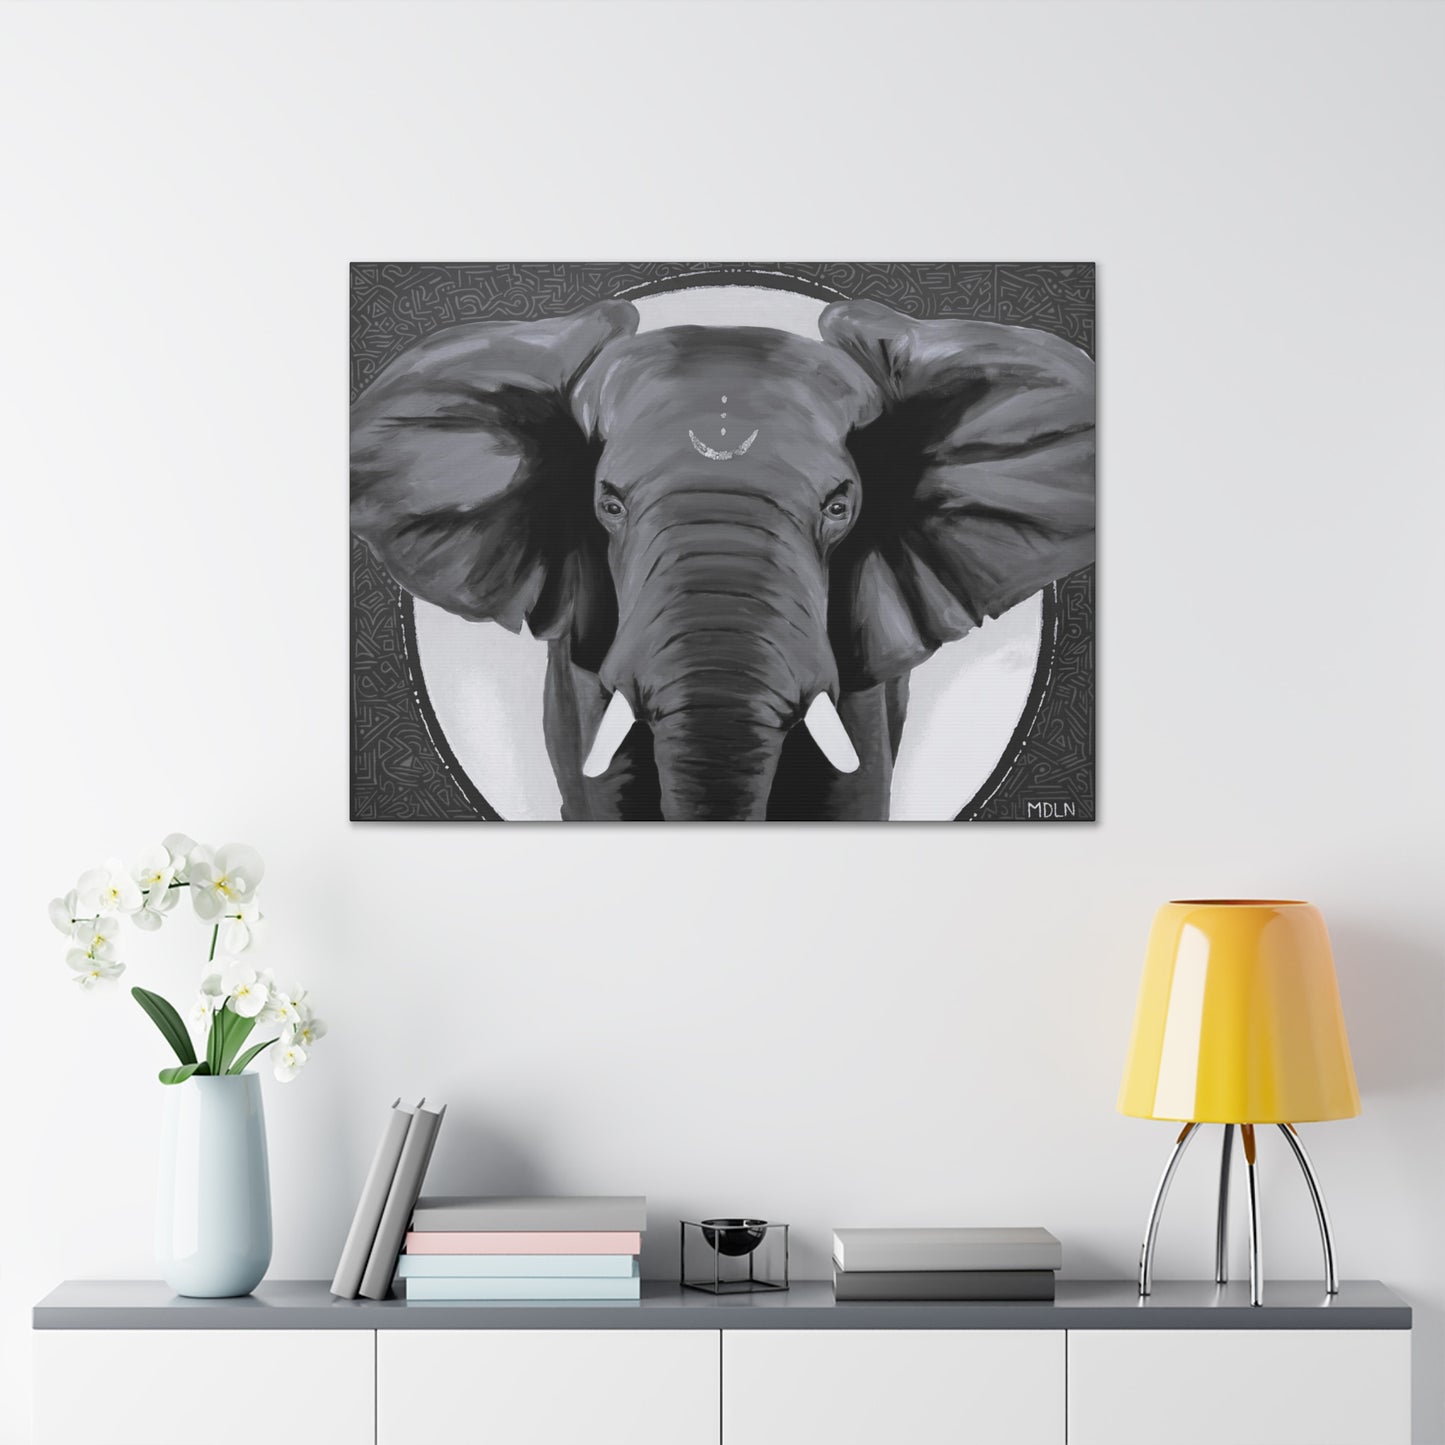 Black and white African elephant art print on canvas hanging on the wall over a console table with yellow lamp